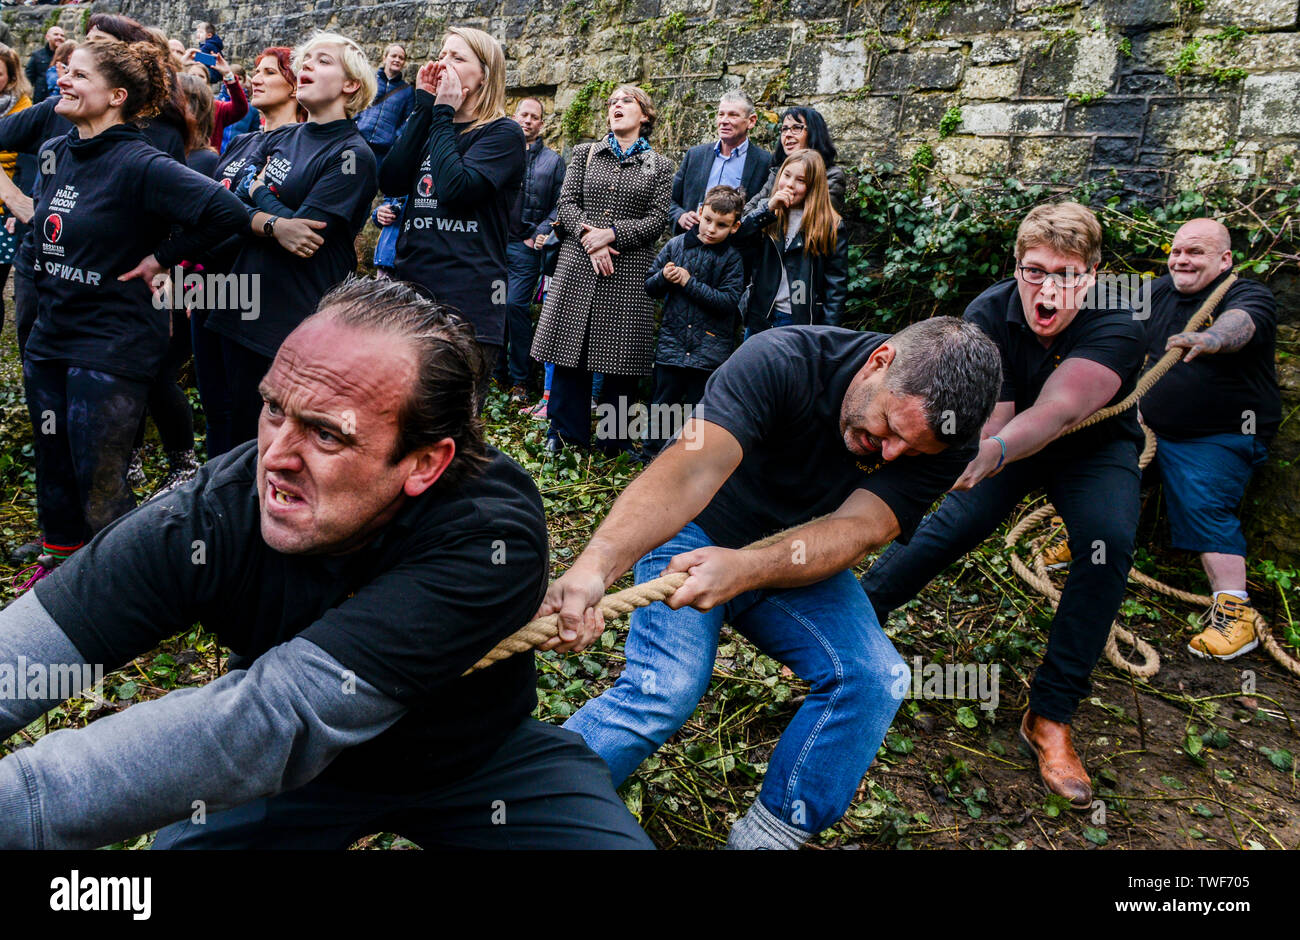 Men competing in the traditional Boxing Day Tug of War between the banks of the River Nidd with teams from the Half Moon pub and the Mother Shipton pub. Stock Photo